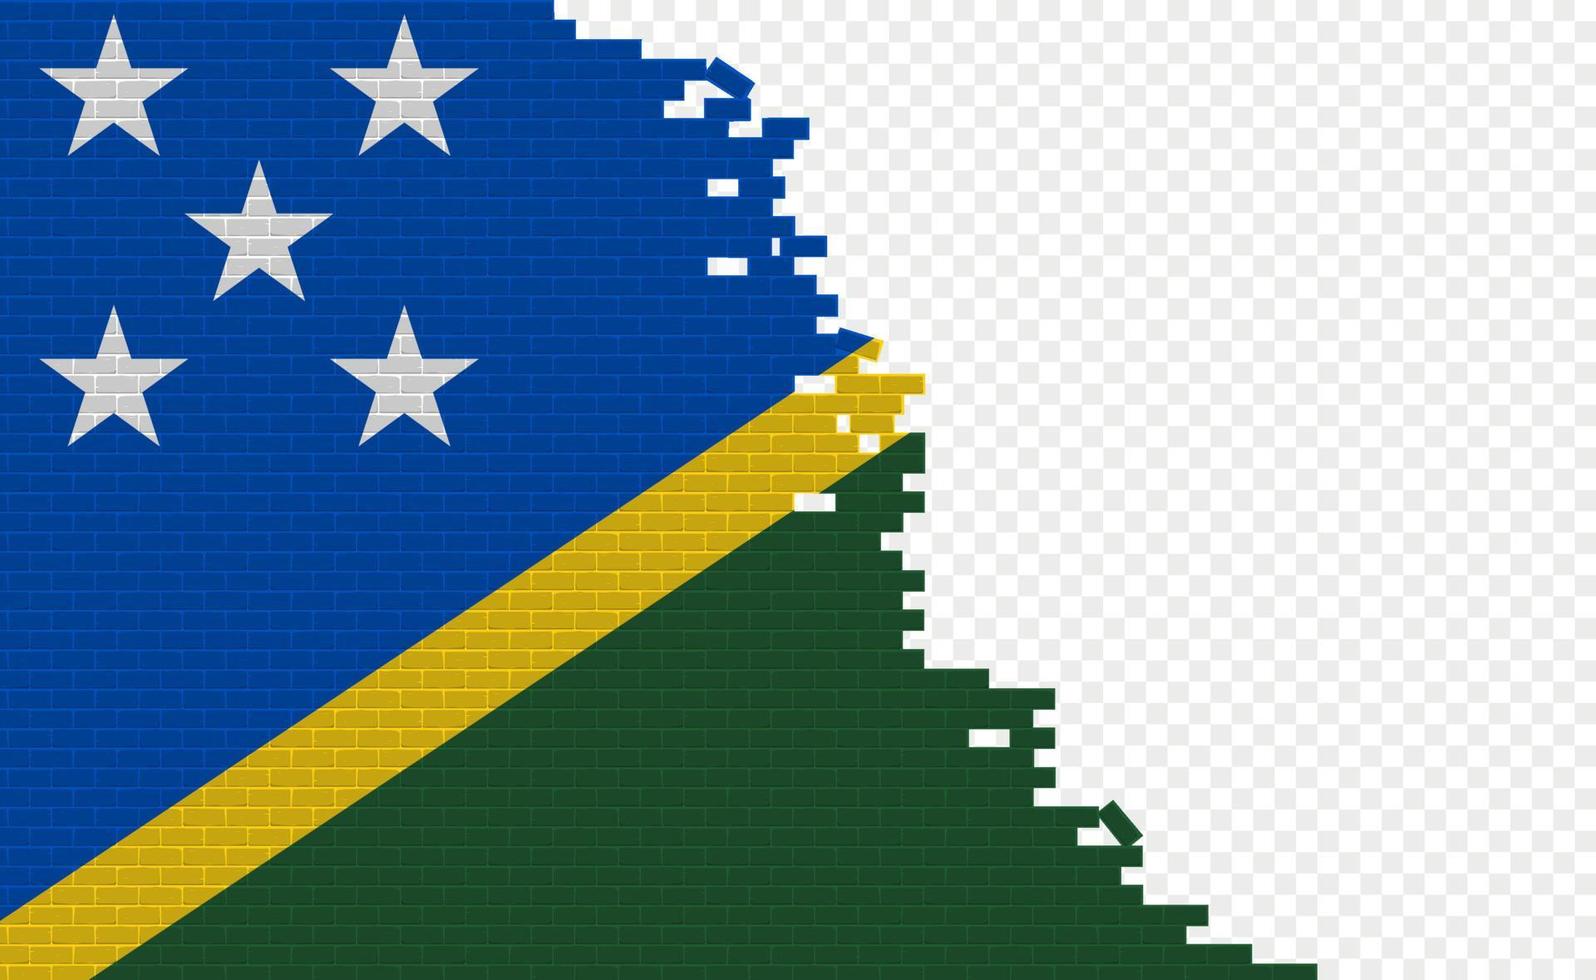 Solomon Islands flag on broken brick wall. Empty flag field of another country. Country comparison. Easy editing and vector in groups.